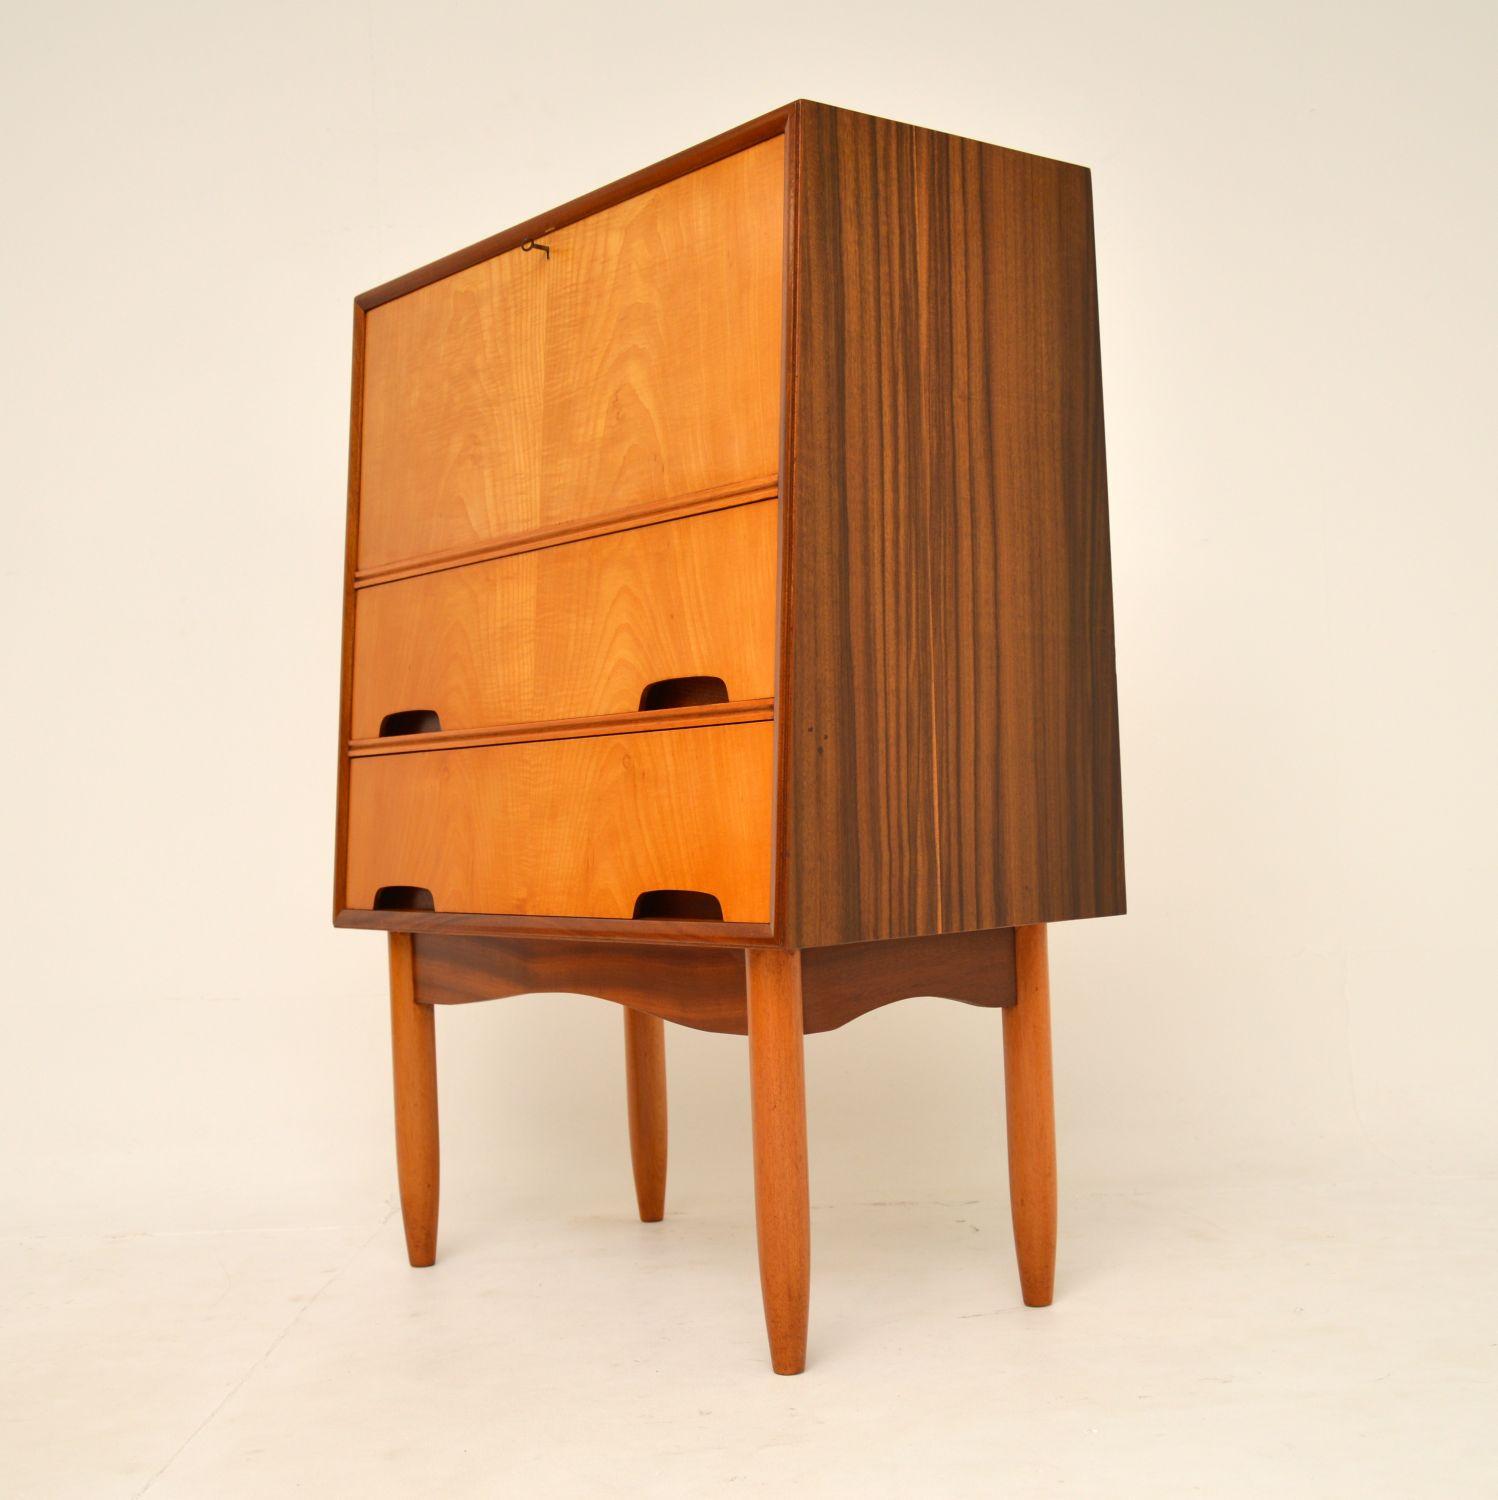 British 1960's Sycamore & Walnut Bureau by Peter Hayward for Vanson For Sale